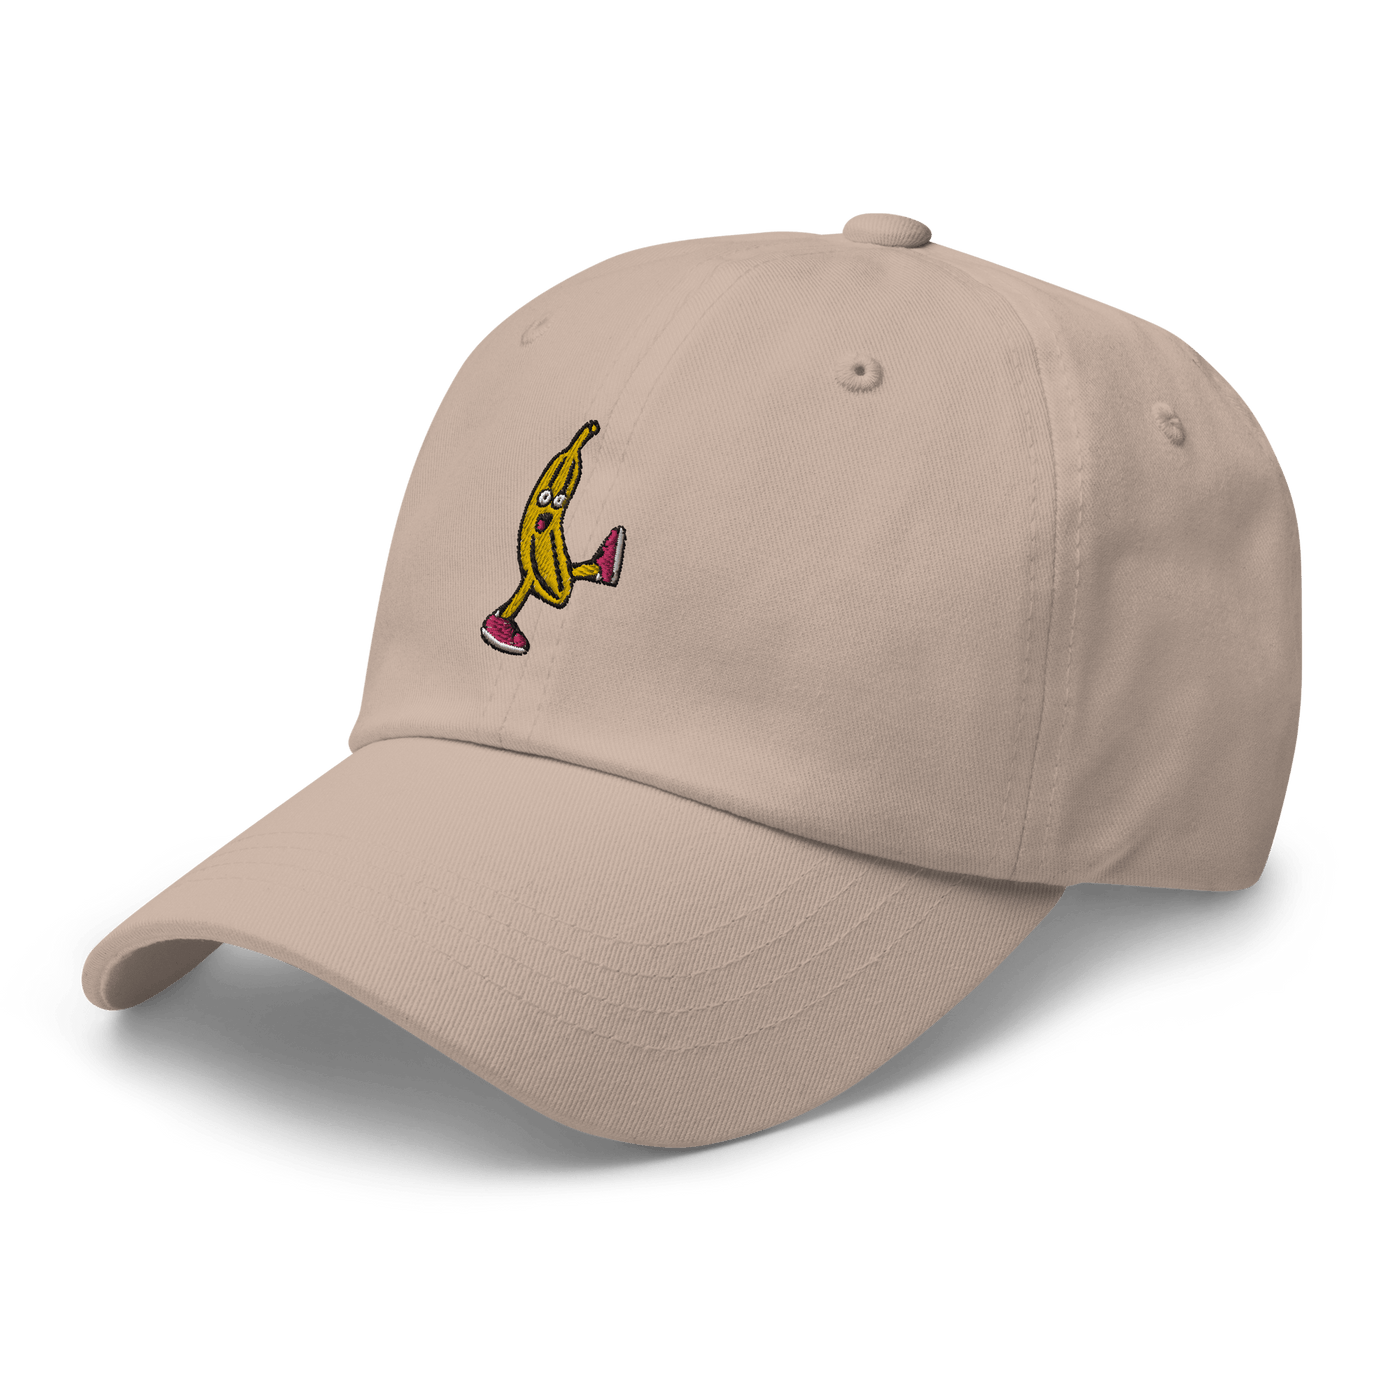 Drunk Banana Dad hat - Stone - - Just Another Cap Store